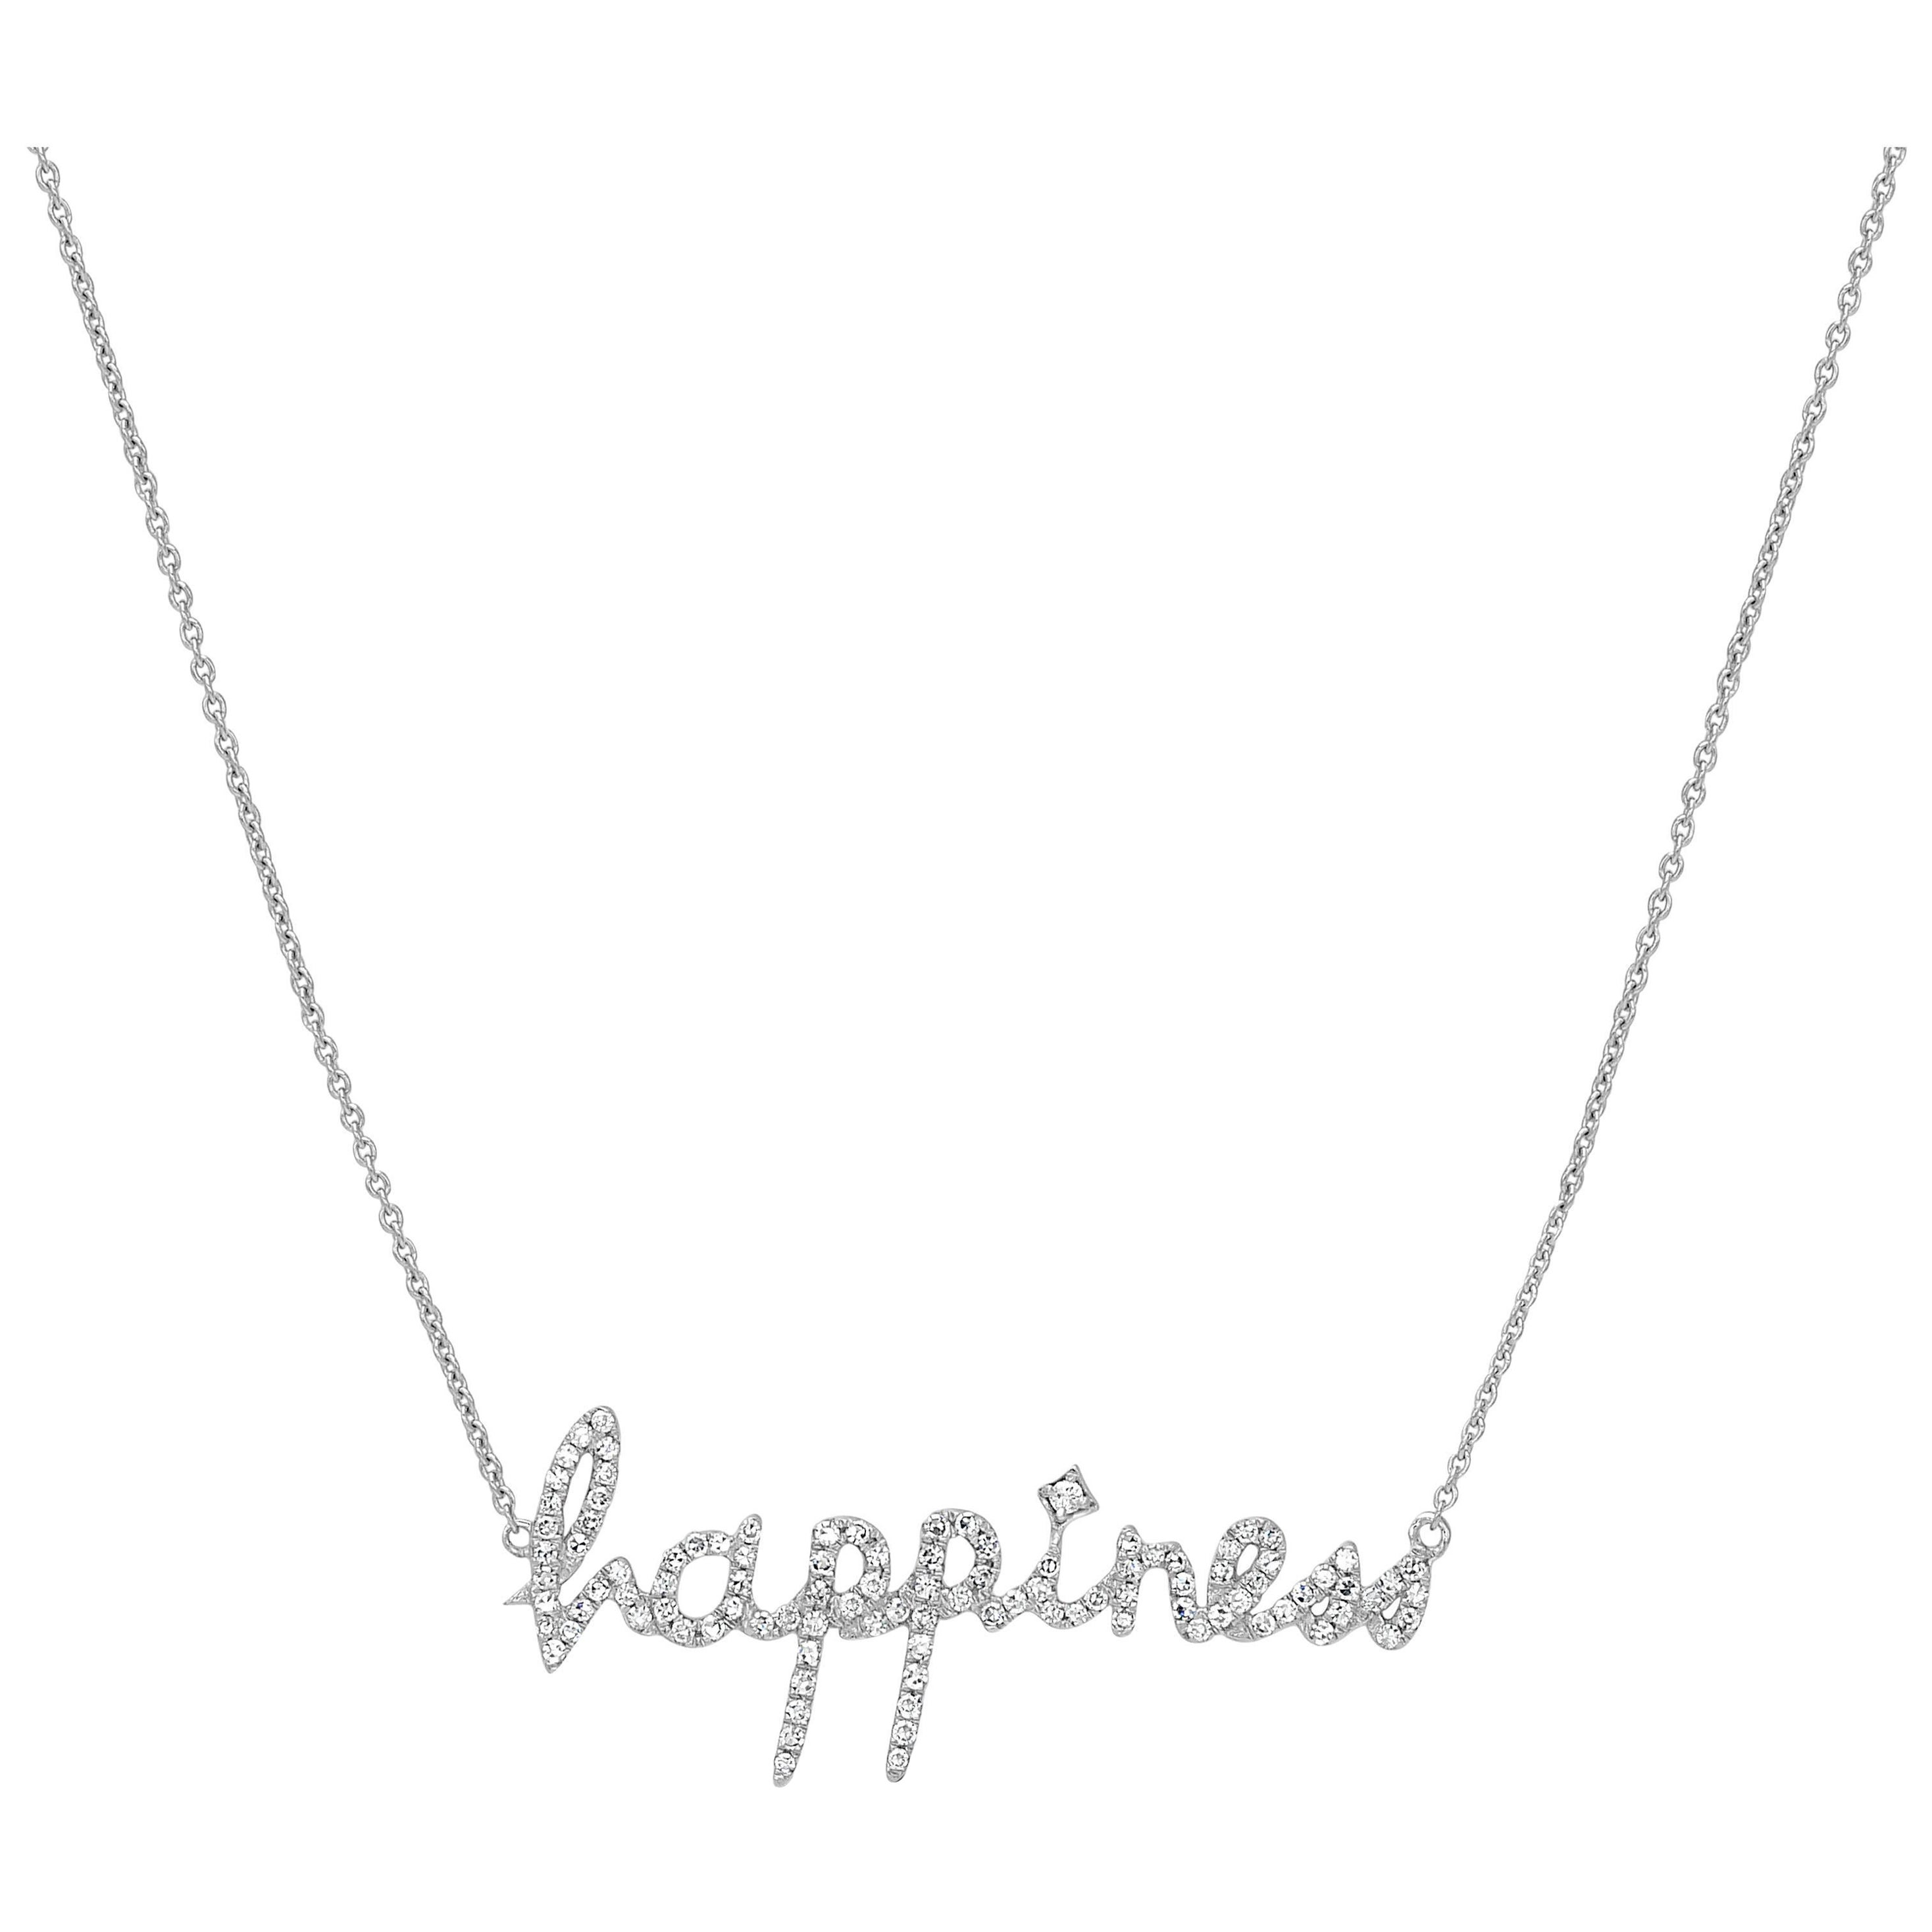 Luxle 1/3 Carat T.W. Diamond "Happiness" Necklace in 14k White Gold For Sale